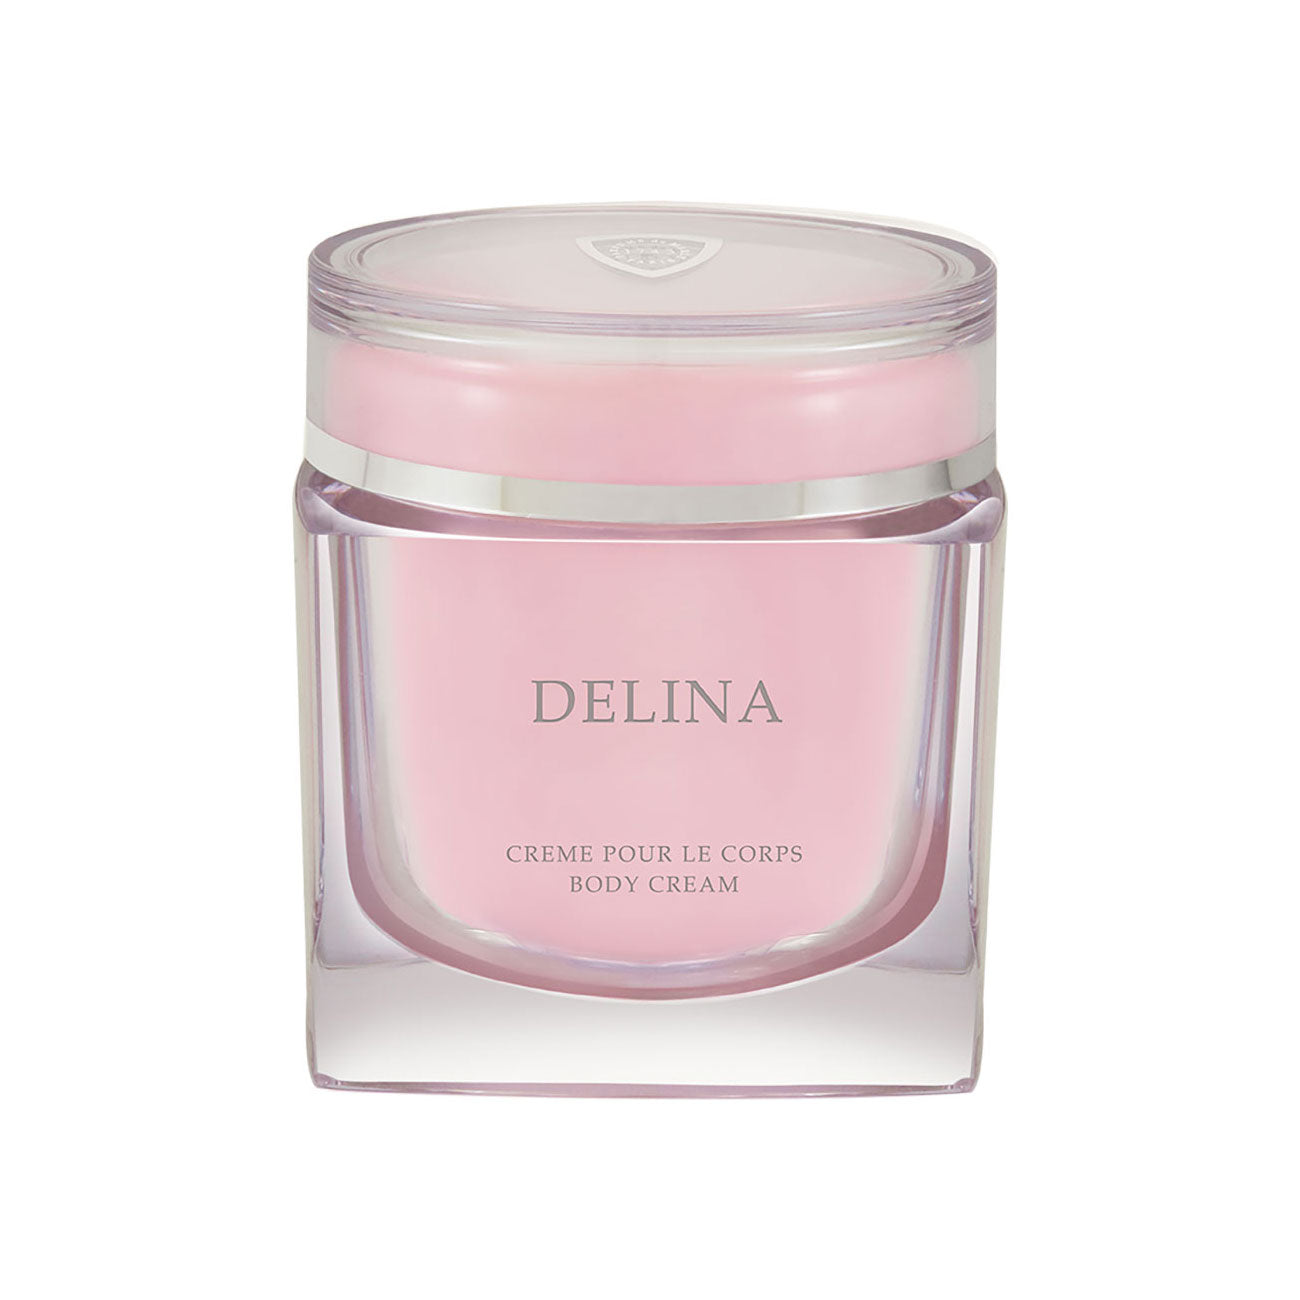 DELINA BODY CREAM - 200ml - Gharyal by Collectibles 